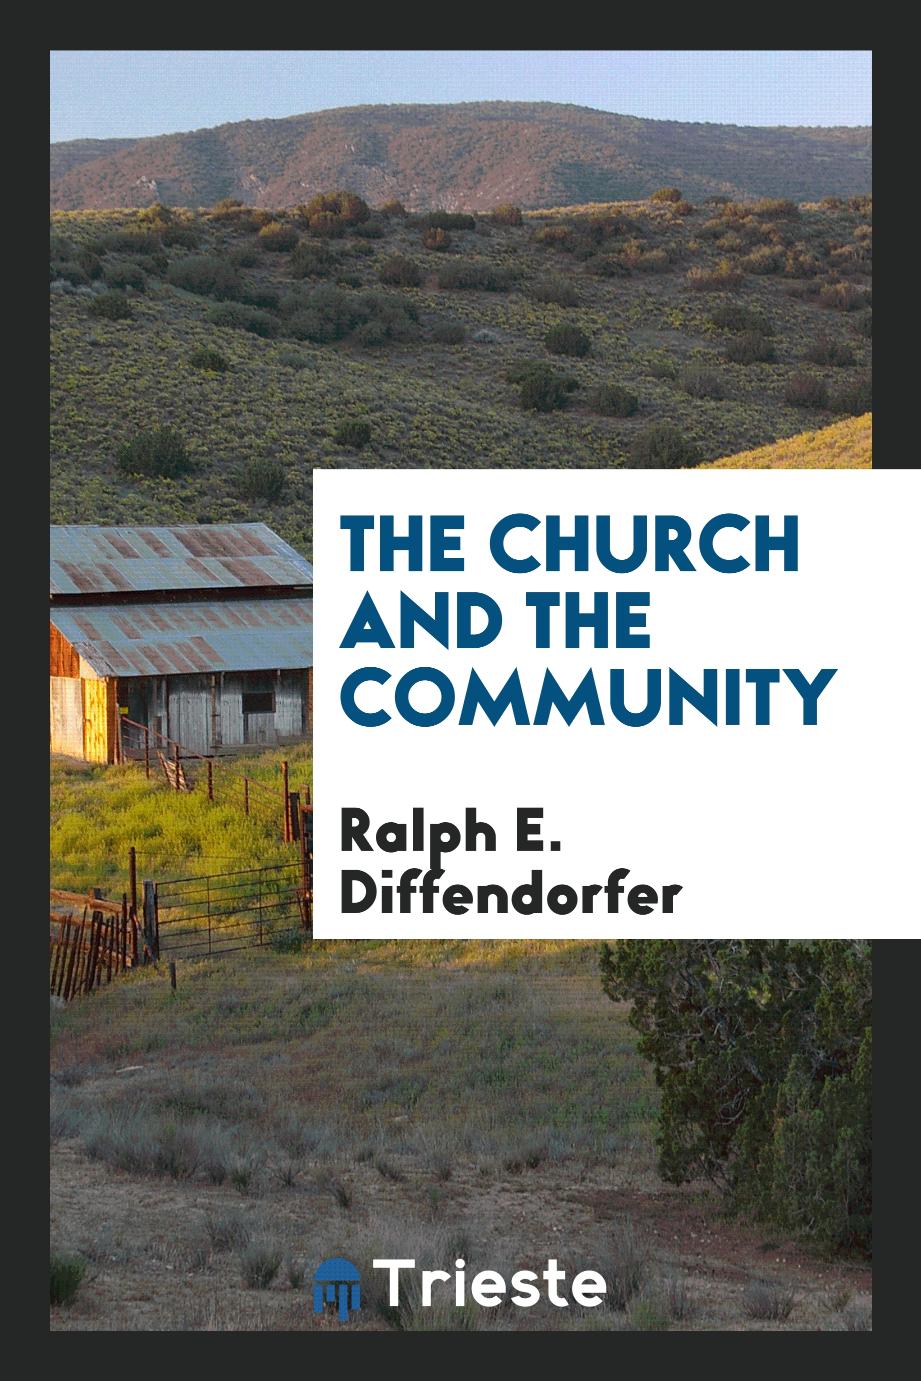 The church and the community